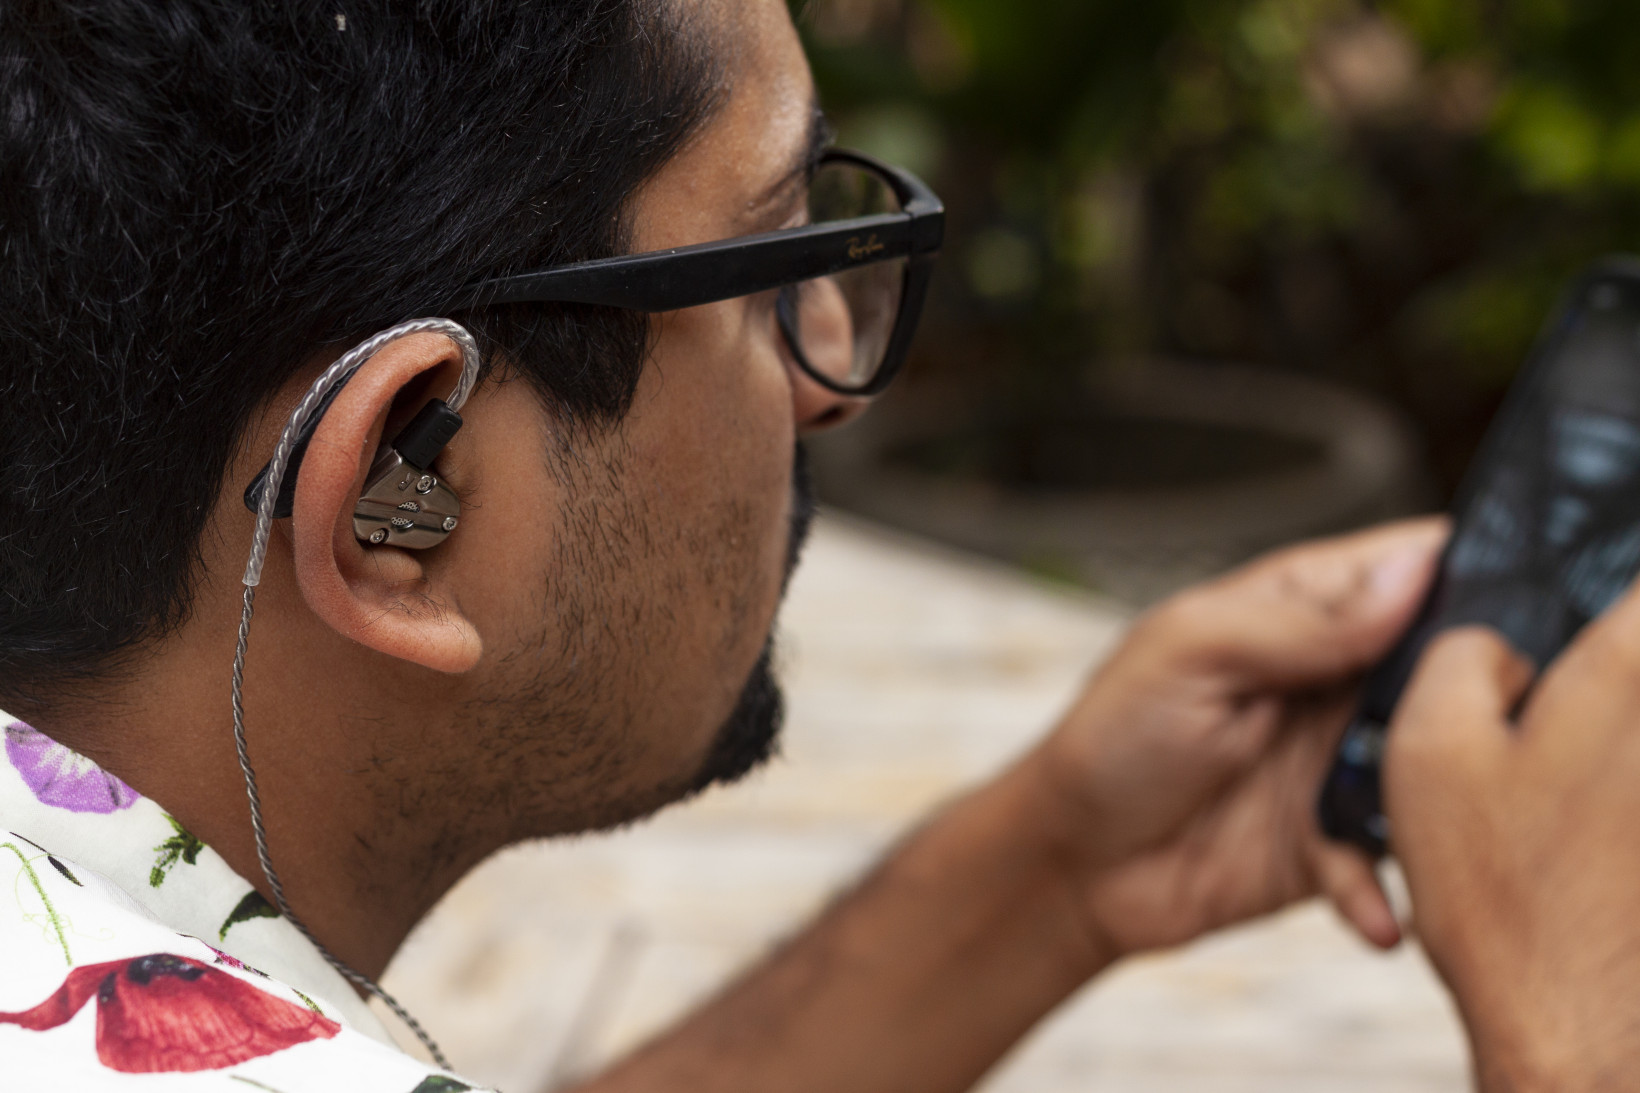 The RevoNext QT5 Earphones have plastic sheaths on the cable to allow it to sit snugly around your ears